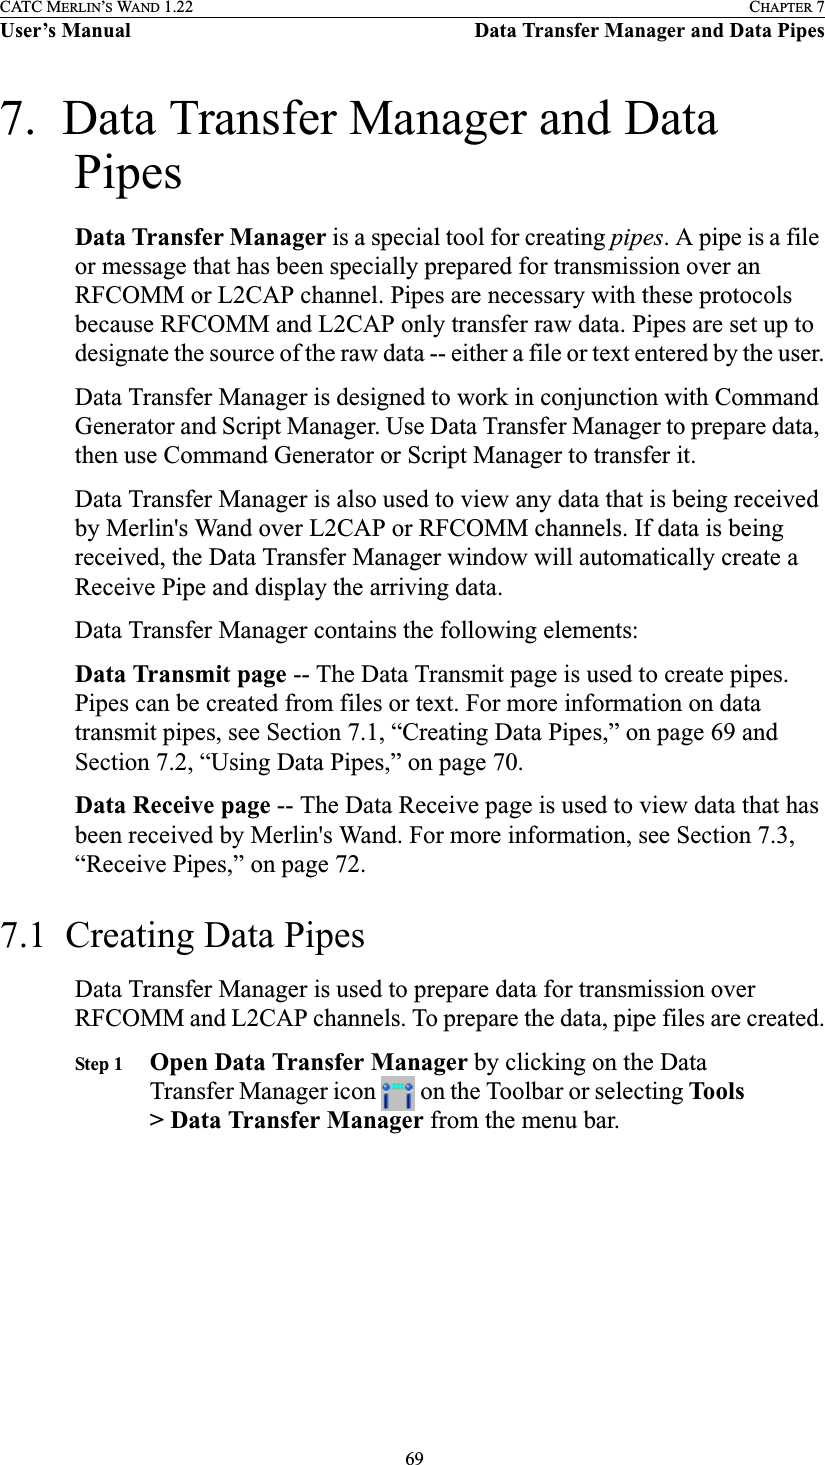  69CATC MERLIN’S WAND 1.22 CHAPTER 7User’s Manual Data Transfer Manager and Data Pipes7.  Data Transfer Manager and Data PipesData Transfer Manager is a special tool for creating pipes. A pipe is a file or message that has been specially prepared for transmission over an RFCOMM or L2CAP channel. Pipes are necessary with these protocols because RFCOMM and L2CAP only transfer raw data. Pipes are set up to designate the source of the raw data -- either a file or text entered by the user.Data Transfer Manager is designed to work in conjunction with Command Generator and Script Manager. Use Data Transfer Manager to prepare data, then use Command Generator or Script Manager to transfer it.Data Transfer Manager is also used to view any data that is being received by Merlin&apos;s Wand over L2CAP or RFCOMM channels. If data is being received, the Data Transfer Manager window will automatically create a Receive Pipe and display the arriving data.Data Transfer Manager contains the following elements:Data Transmit page -- The Data Transmit page is used to create pipes. Pipes can be created from files or text. For more information on data transmit pipes, see Section 7.1, “Creating Data Pipes,” on page 69 and Section 7.2, “Using Data Pipes,” on page 70.Data Receive page -- The Data Receive page is used to view data that has been received by Merlin&apos;s Wand. For more information, see Section 7.3, “Receive Pipes,” on page 72.7.1  Creating Data PipesData Transfer Manager is used to prepare data for transmission over RFCOMM and L2CAP channels. To prepare the data, pipe files are created.Step 1 Open Data Transfer Manager by clicking on the Data Transfer Manager icon   on the Toolbar or selecting Tools &gt; Data Transfer Manager from the menu bar.